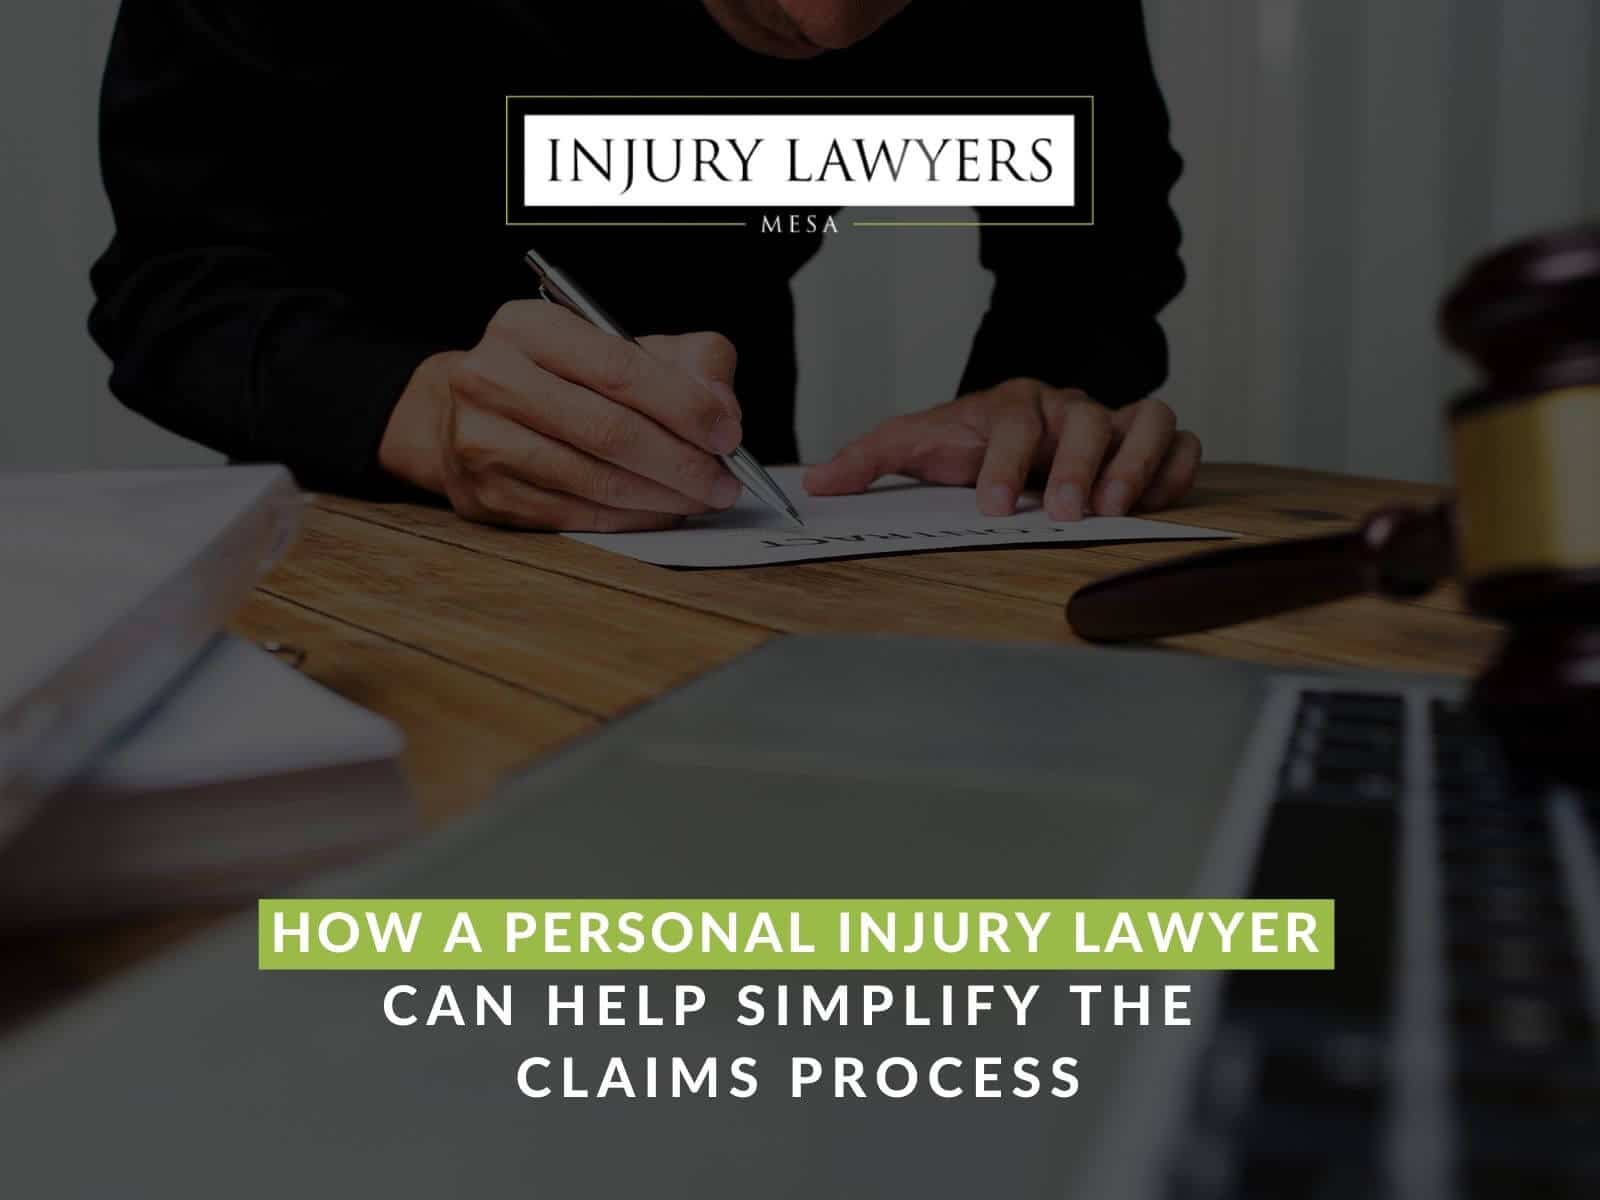 How a Personal Injury Lawyer Can Help Simplify the Claims Process